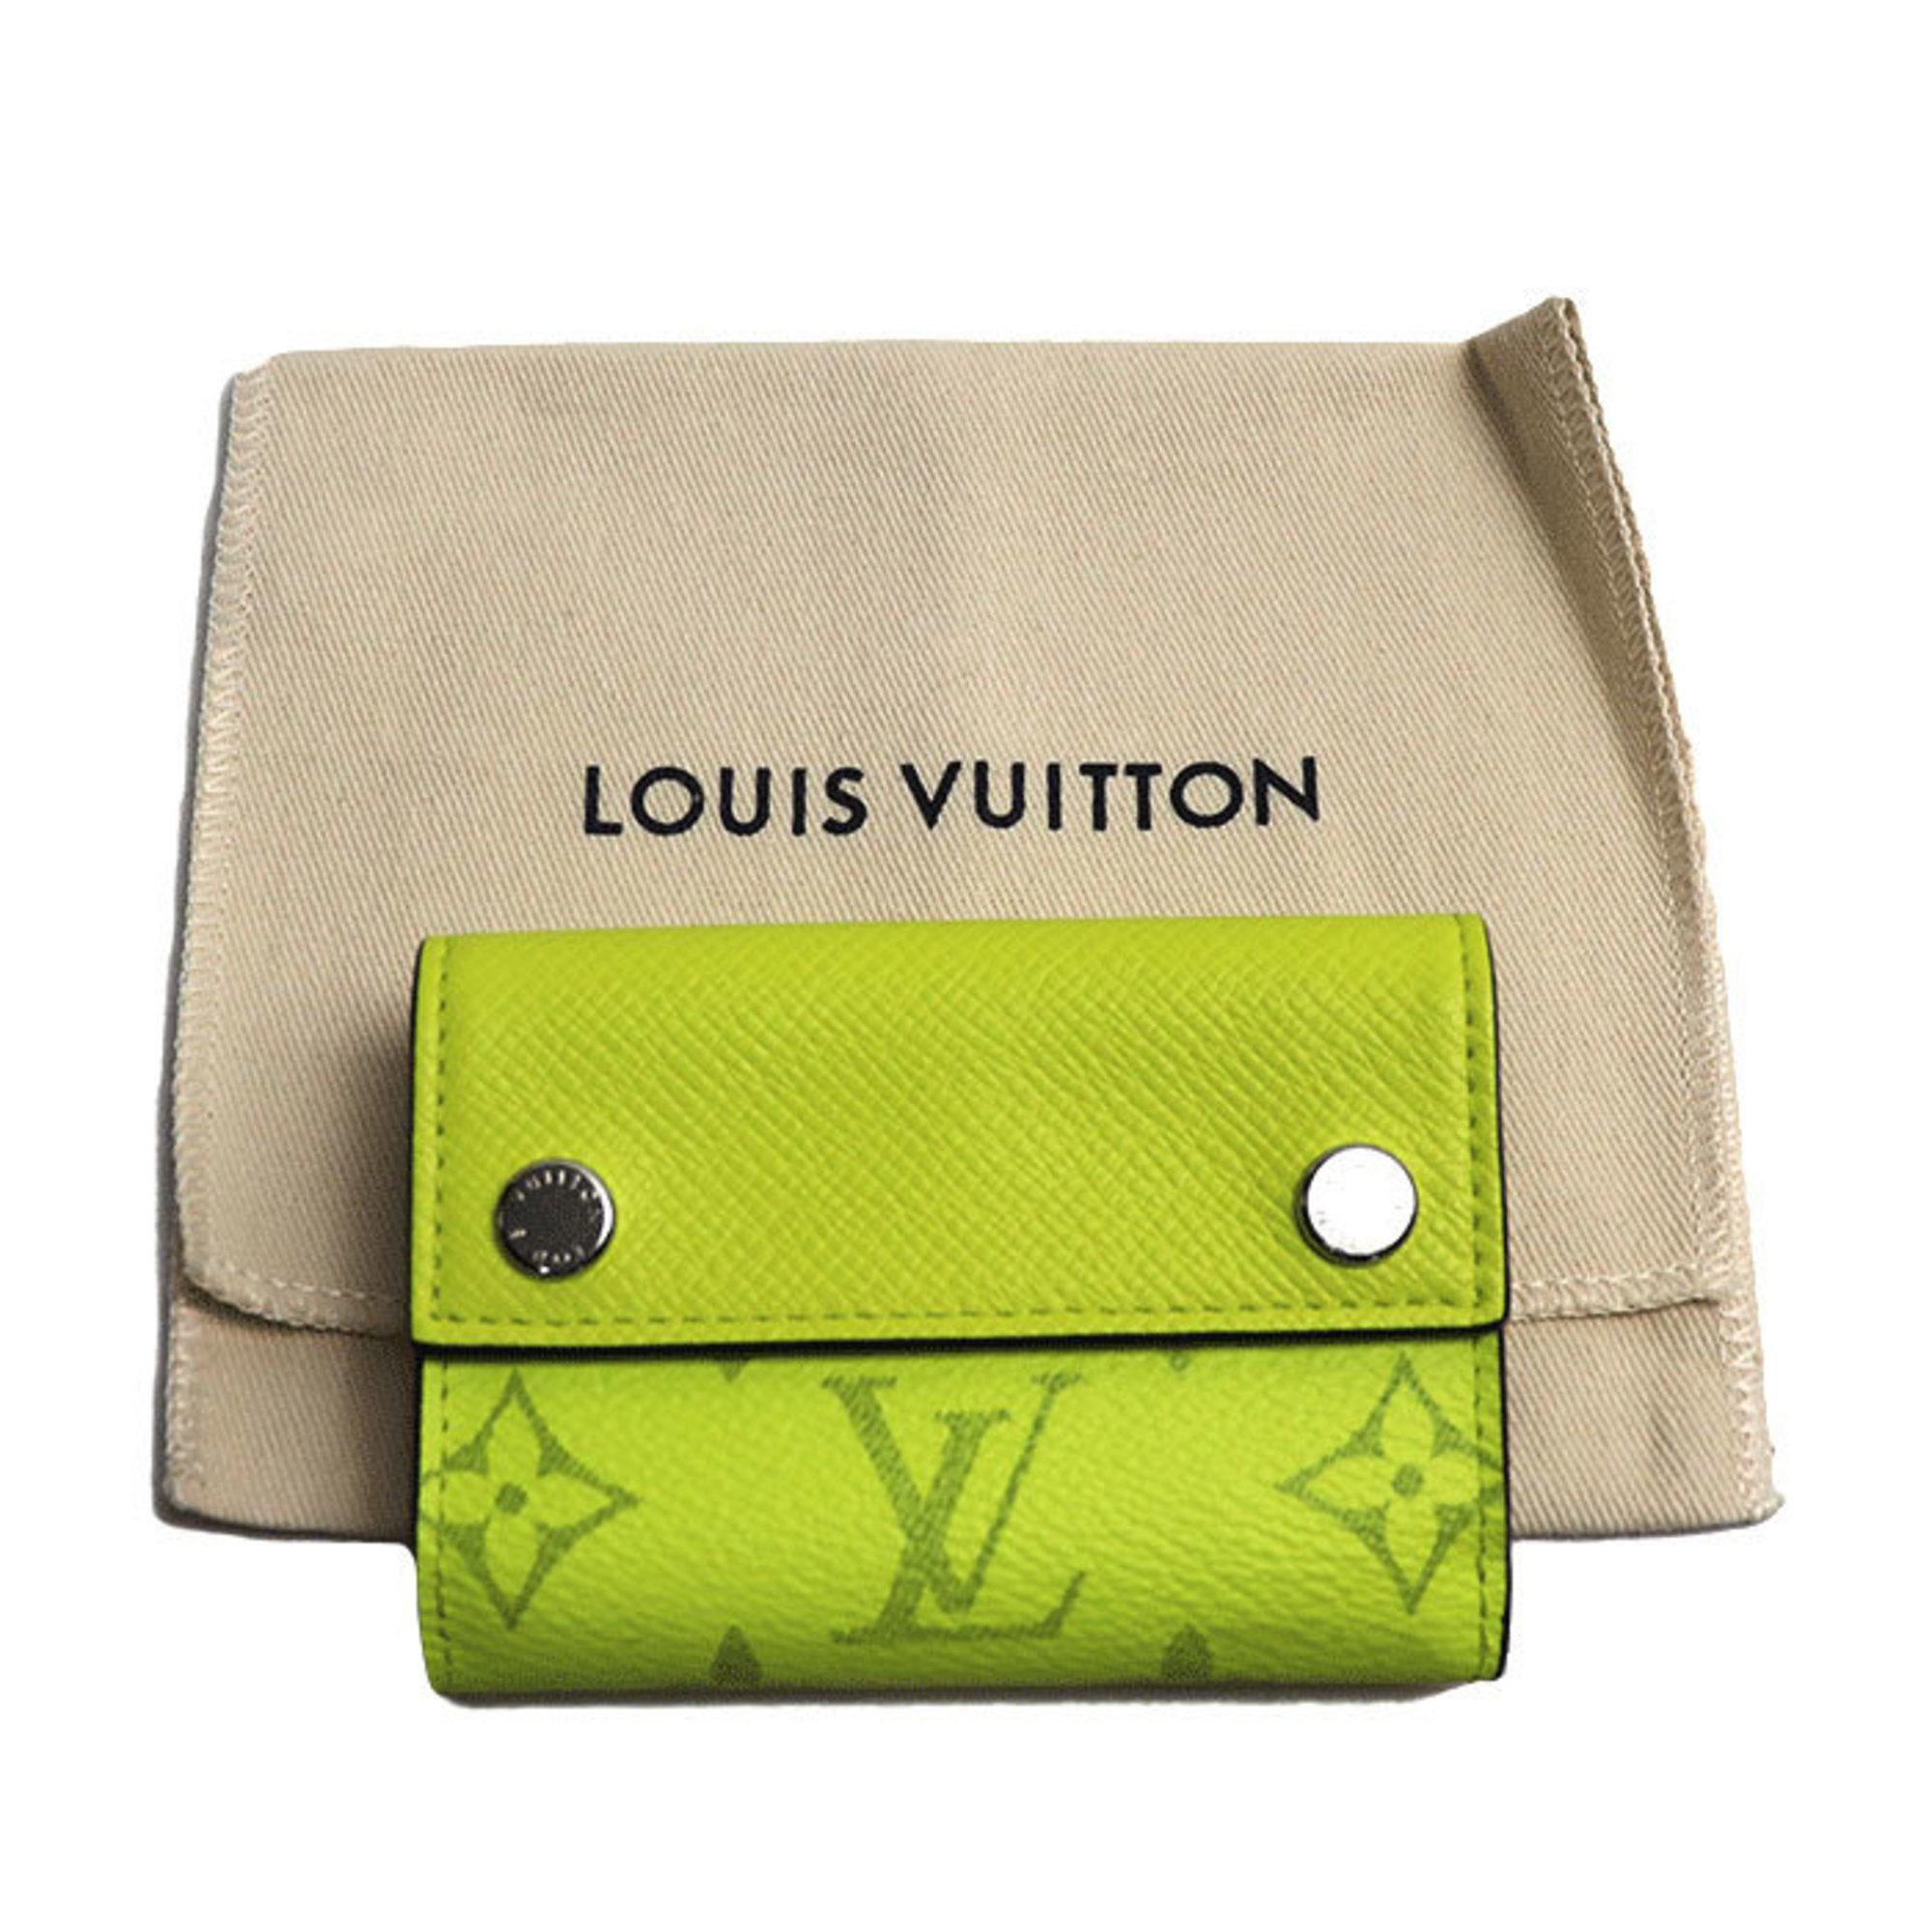 LOUIS VUITTON Discovery Compact Trifold Wallet Tigerama Yellow M67629 UB2149 Men's